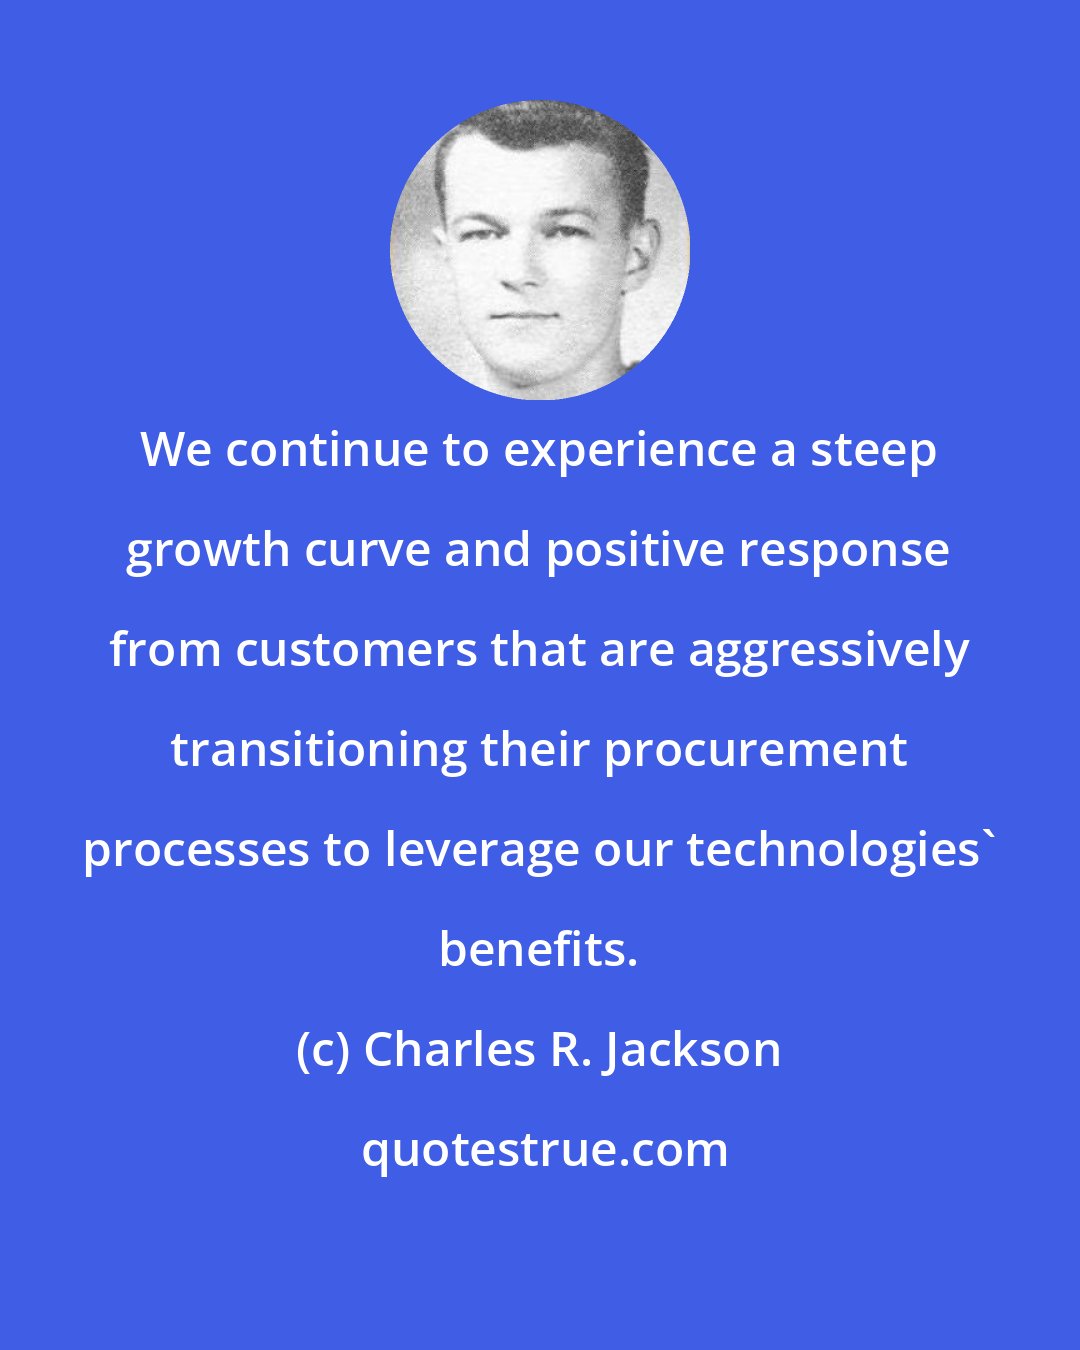 Charles R. Jackson: We continue to experience a steep growth curve and positive response from customers that are aggressively transitioning their procurement processes to leverage our technologies' benefits.